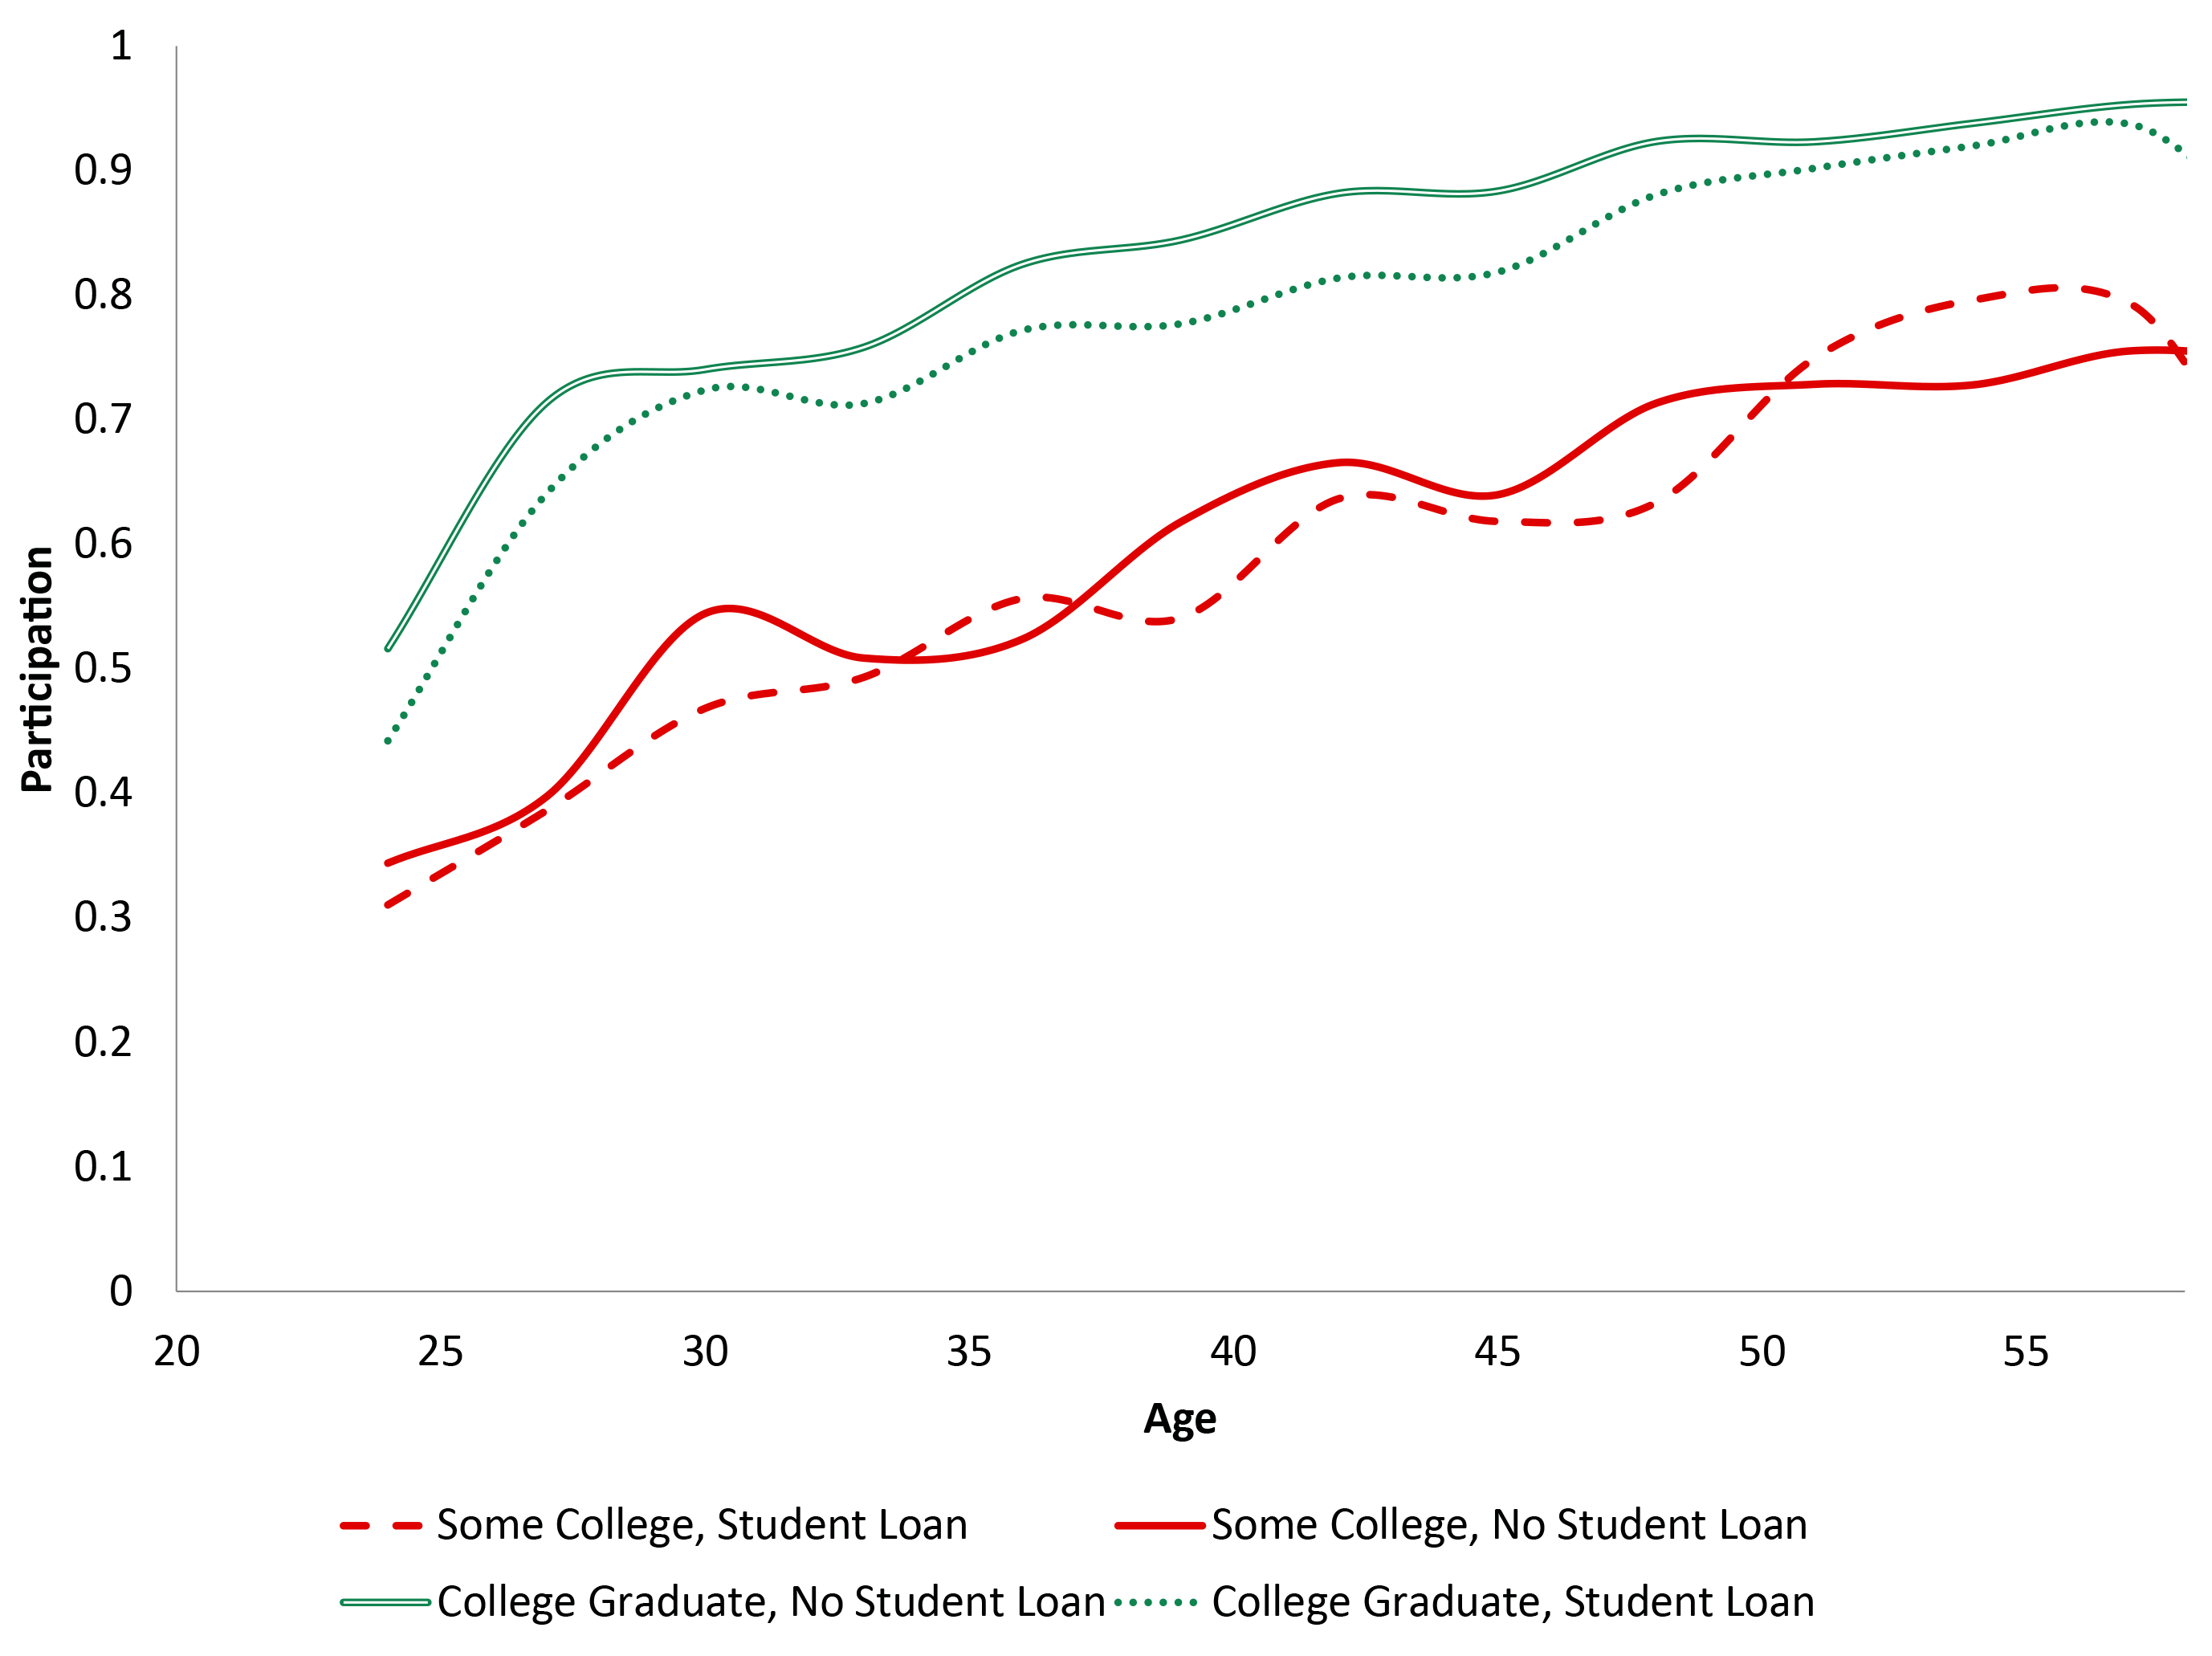 Figure 2: Estimated Participation Rate over the Life Cycle by Educational Attainment and Student Loan Status for 1973-1975 Birth Cohort (SCF). See accessible link for data description.